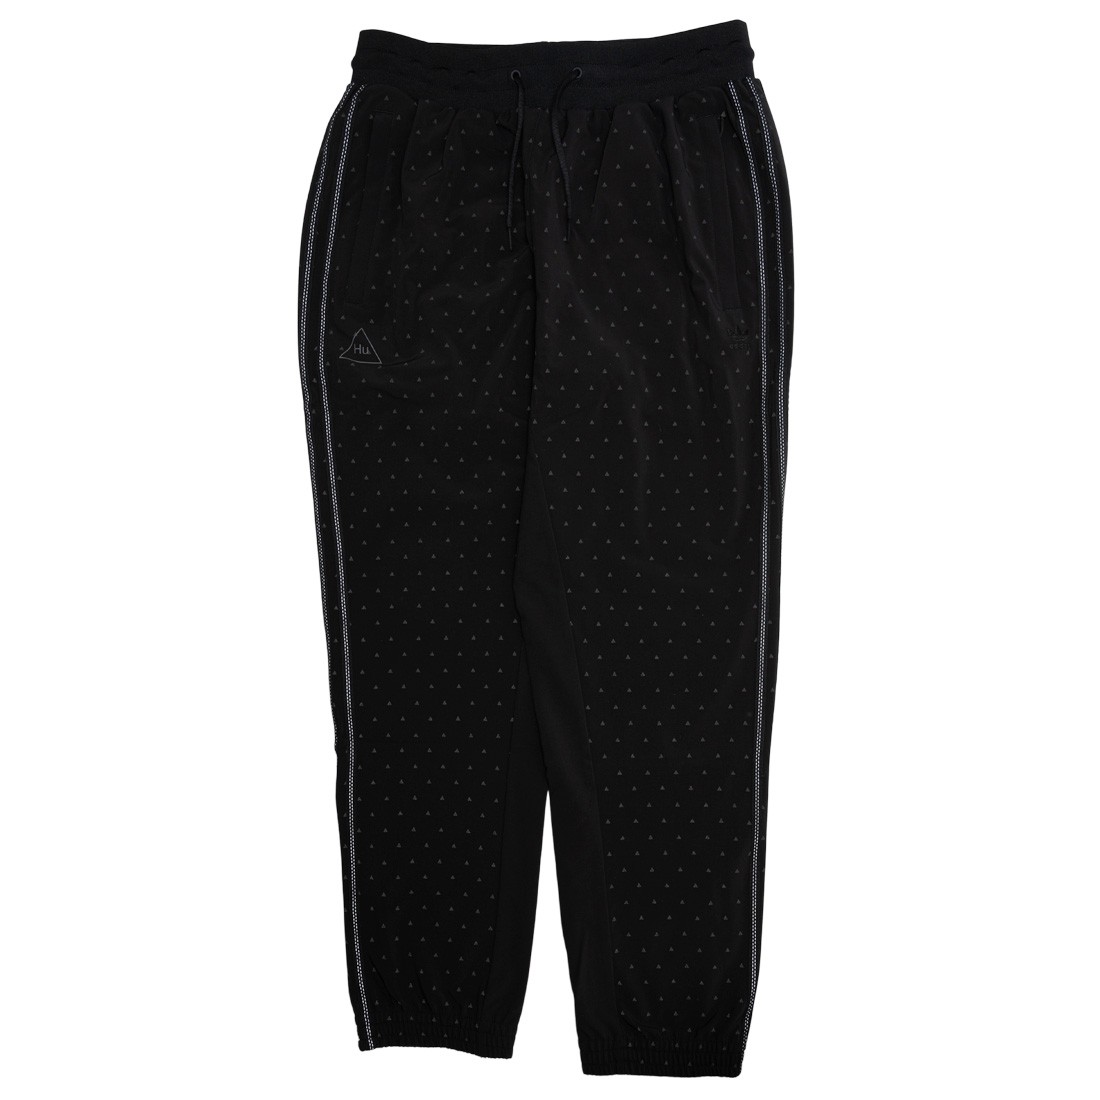 ADIDAS Pants Black Men's Athletic Casual Daily Sport Pants - FT1455 @ Best  Price Online | Jumia Egypt